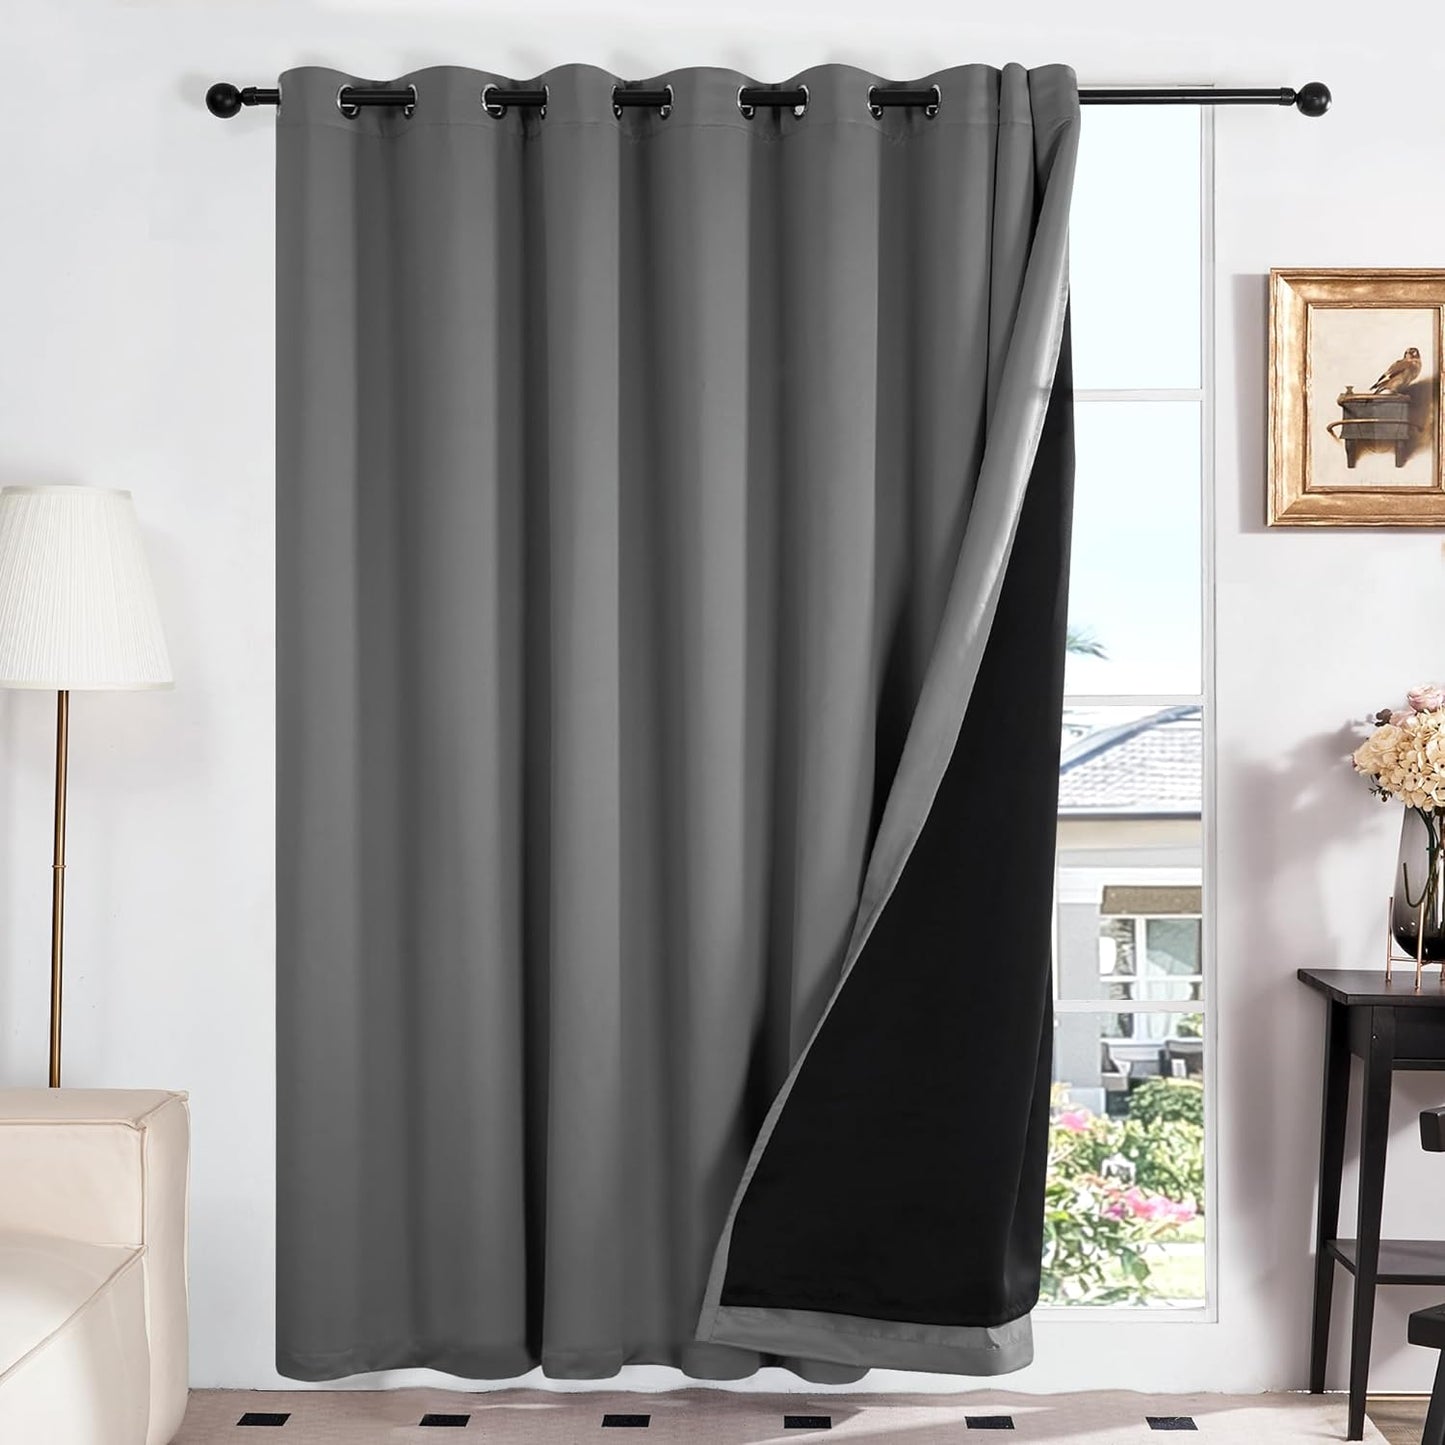 Deconovo 100% White Blackout Curtains, Double Layer Sliding Door Curtain for Living Room, Extra Wide Room Divder Curtains for Patio Door (100W X 84L Inches, Pure White, 1 Panel)  DECONOVO Dark Grey 100W X 95L Inch 